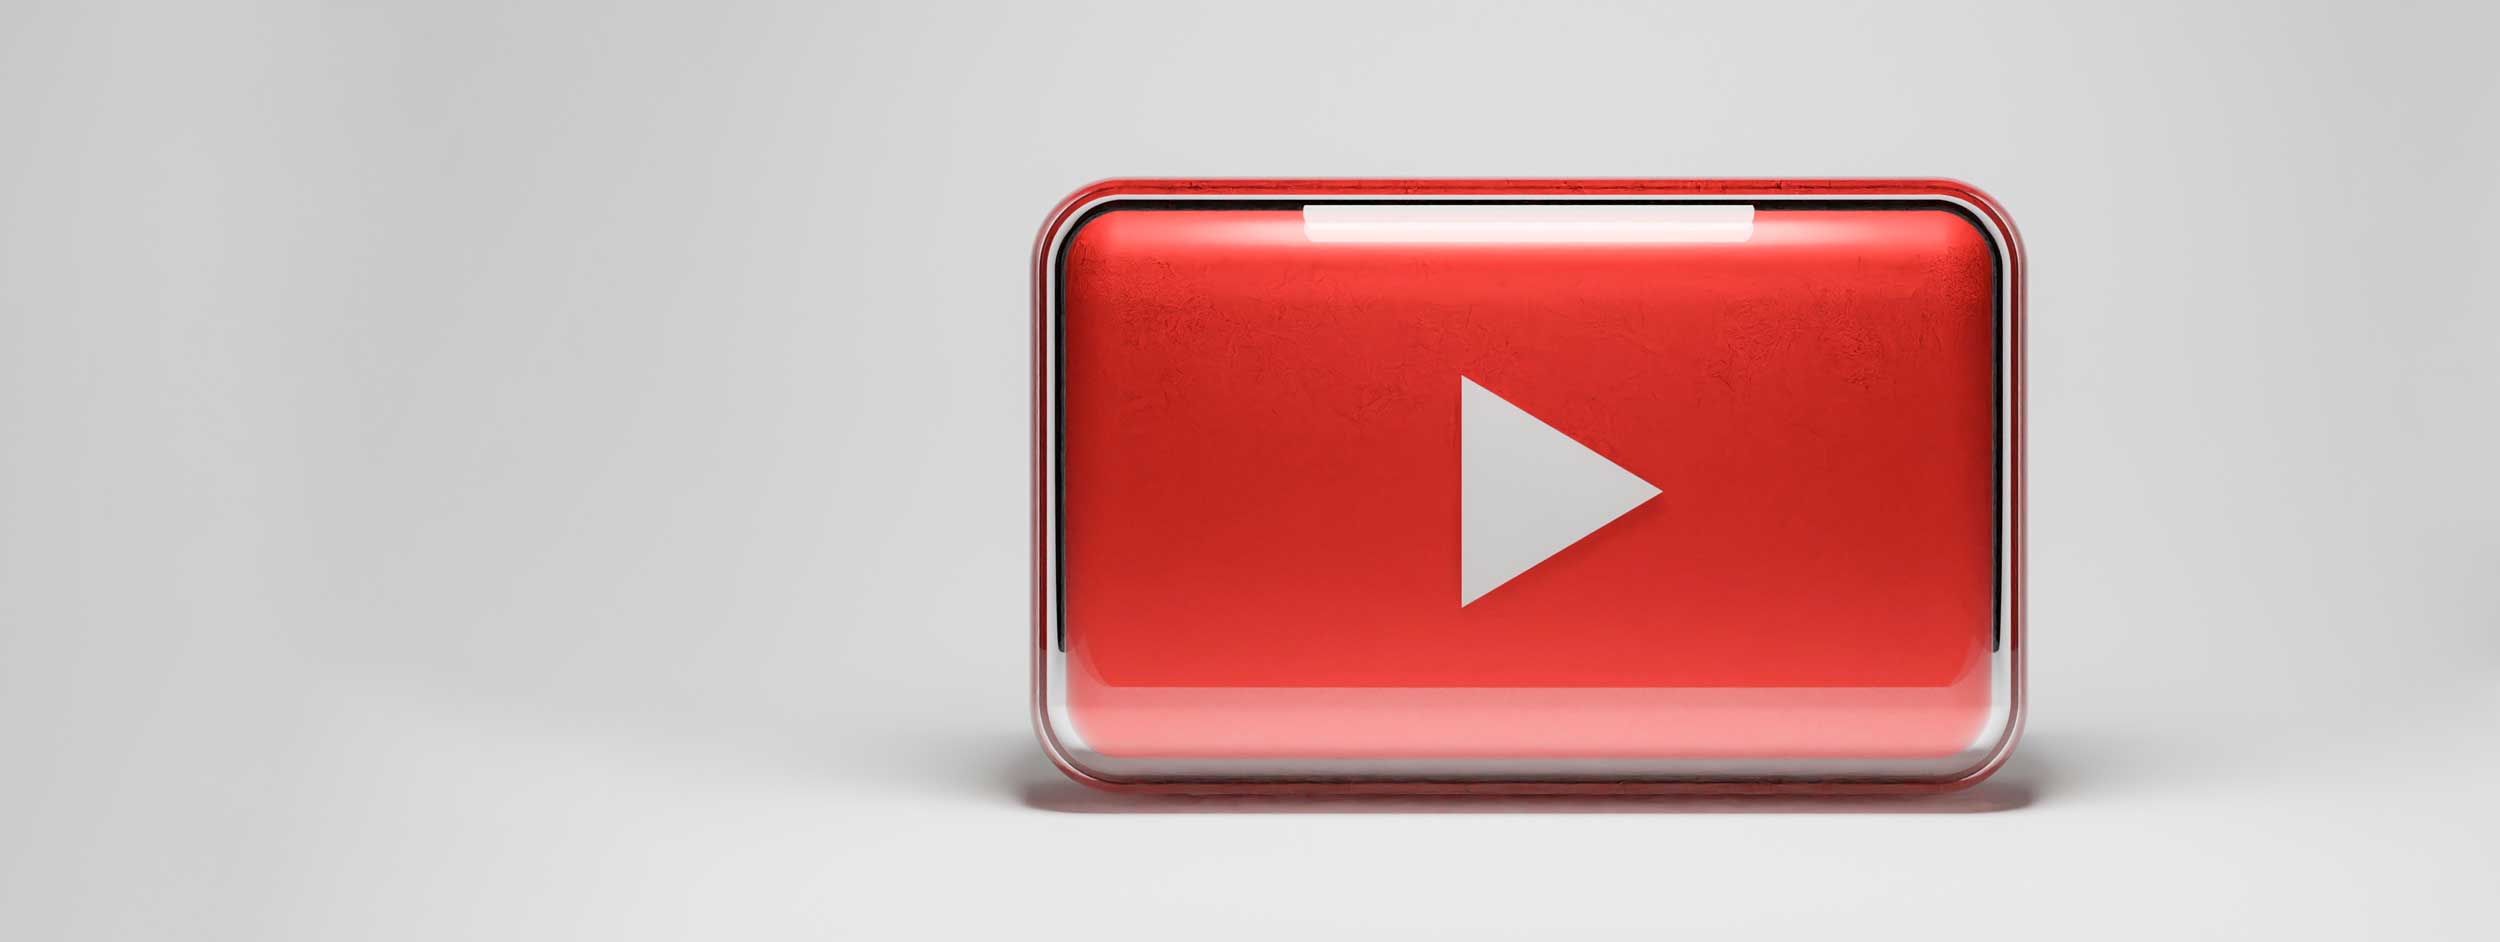 The YouTube play button logo in glass form for the media tips page